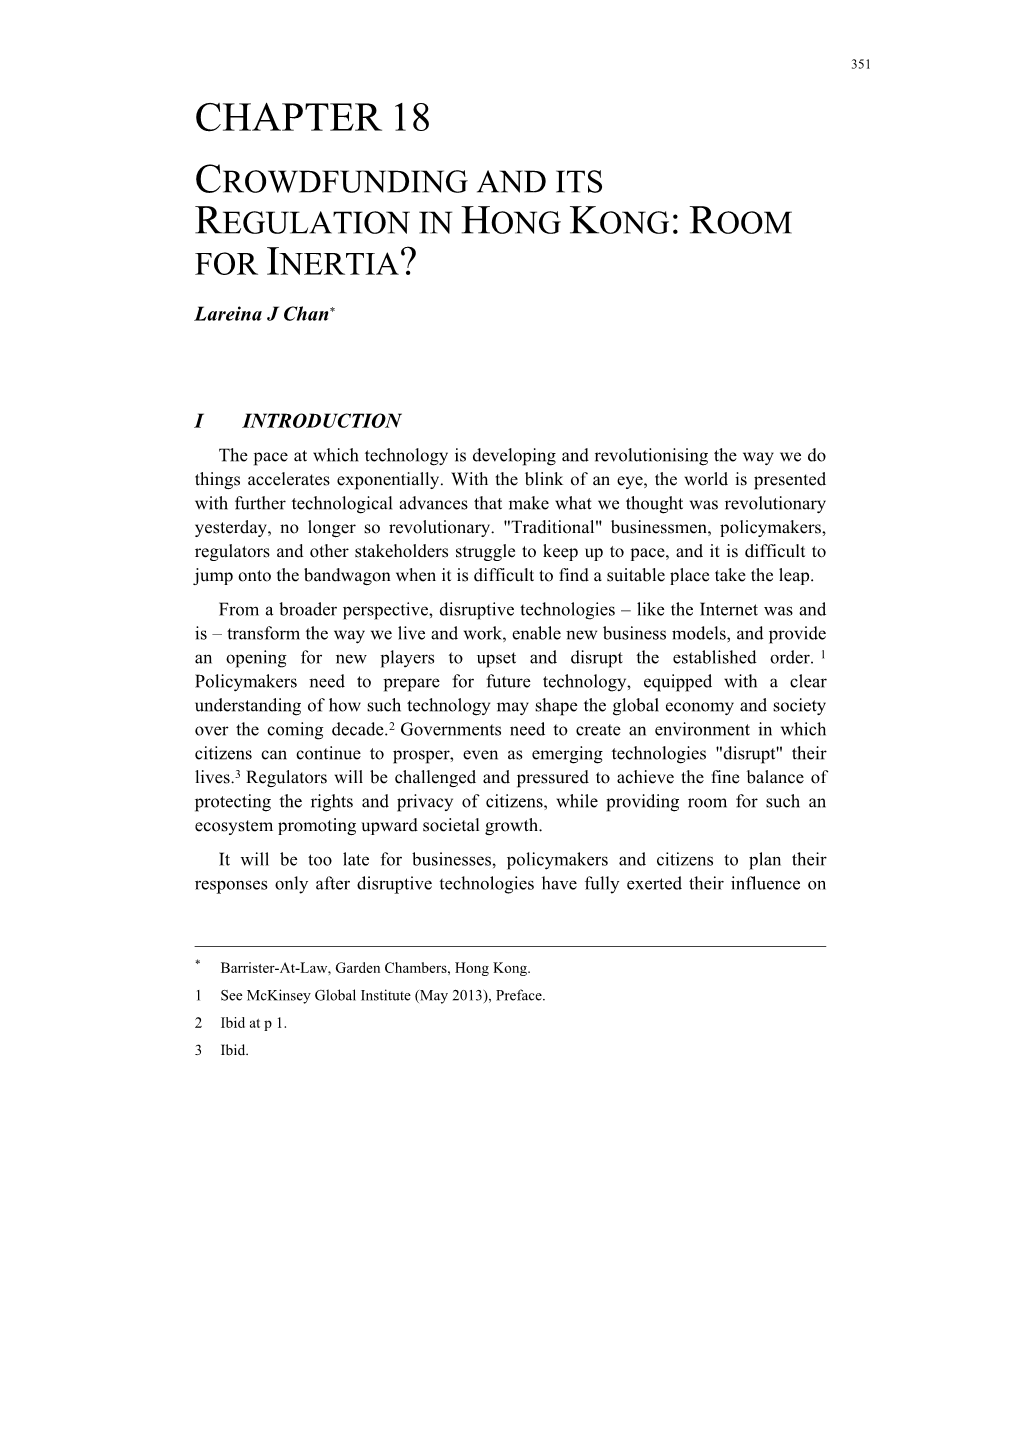 Chapter 18: Crowdfunding and Its Regulation in Hong Kong: Room for Inertia?